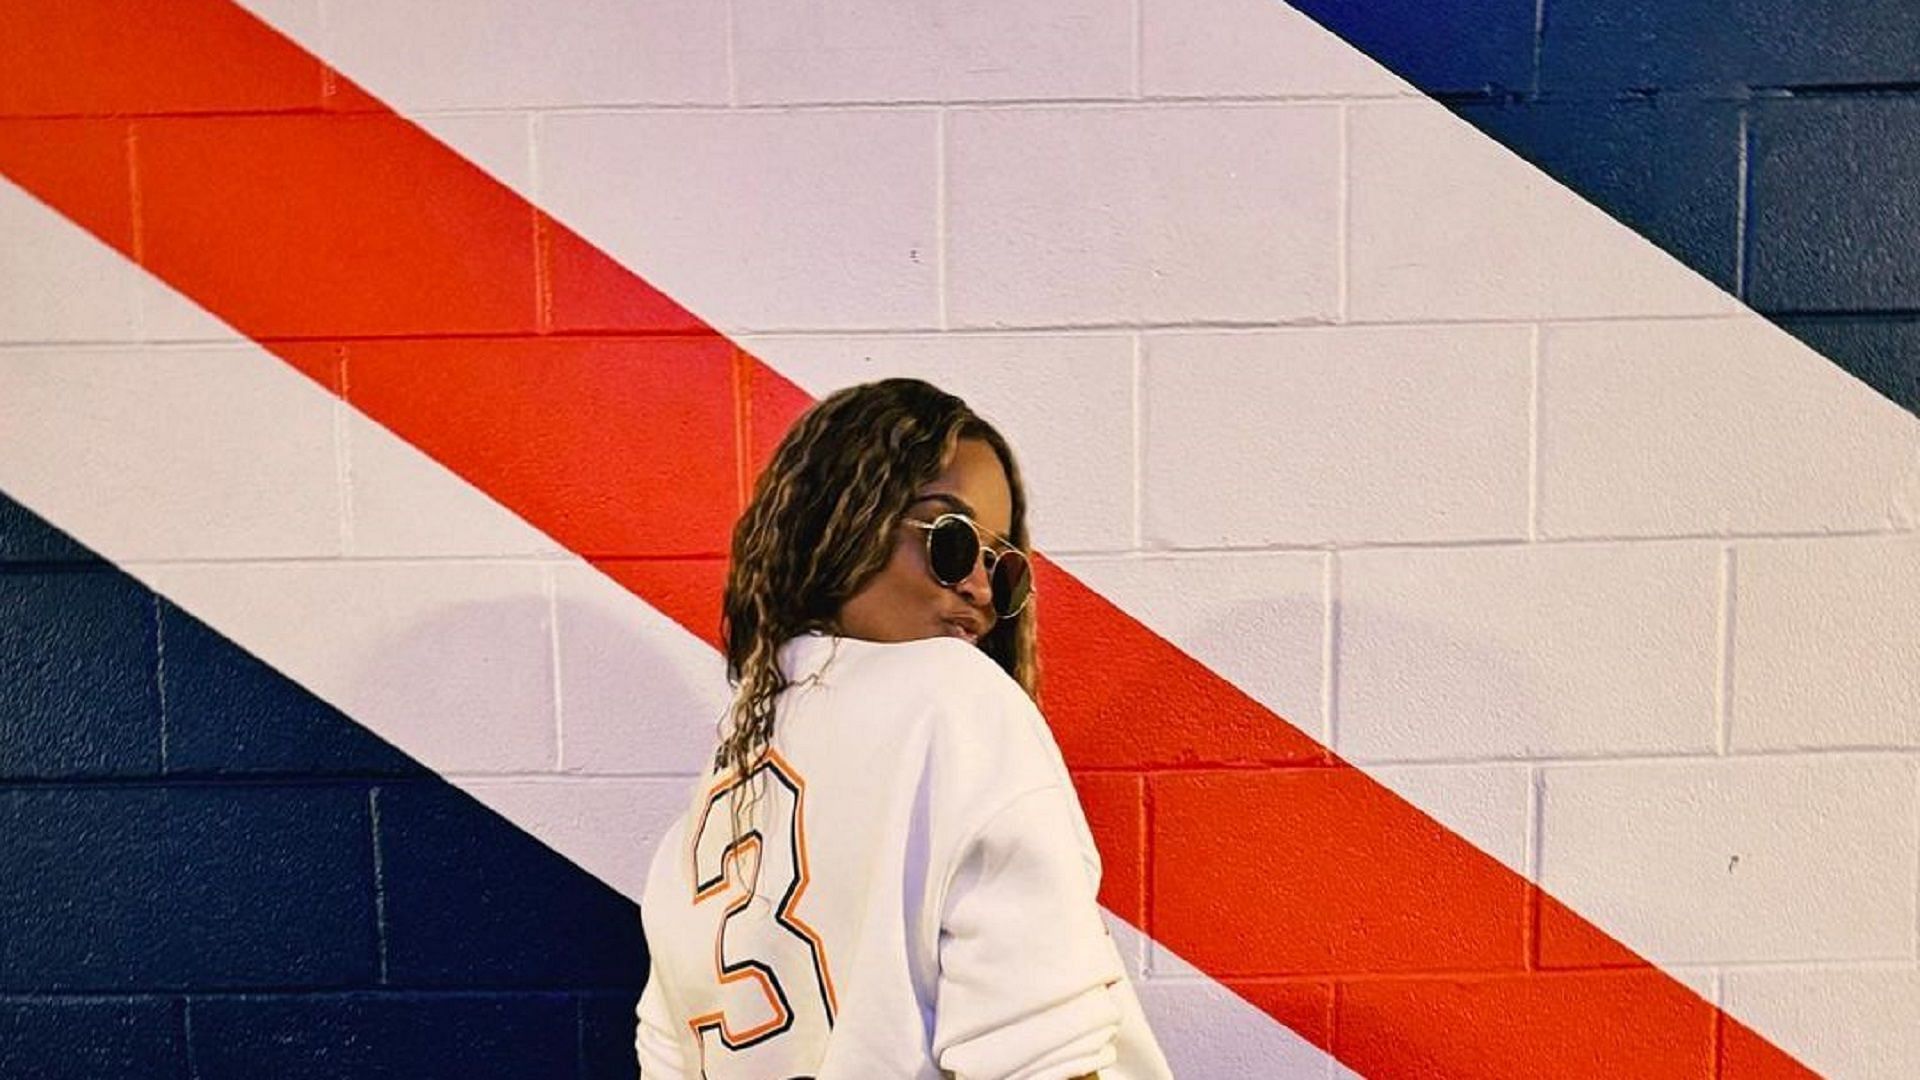 IN PHOTOS: Ciara Wilson shows off baby bump as Russell Wilson leads Broncos to stellar win vs Packers - Courtesy of Ciara on Instagram